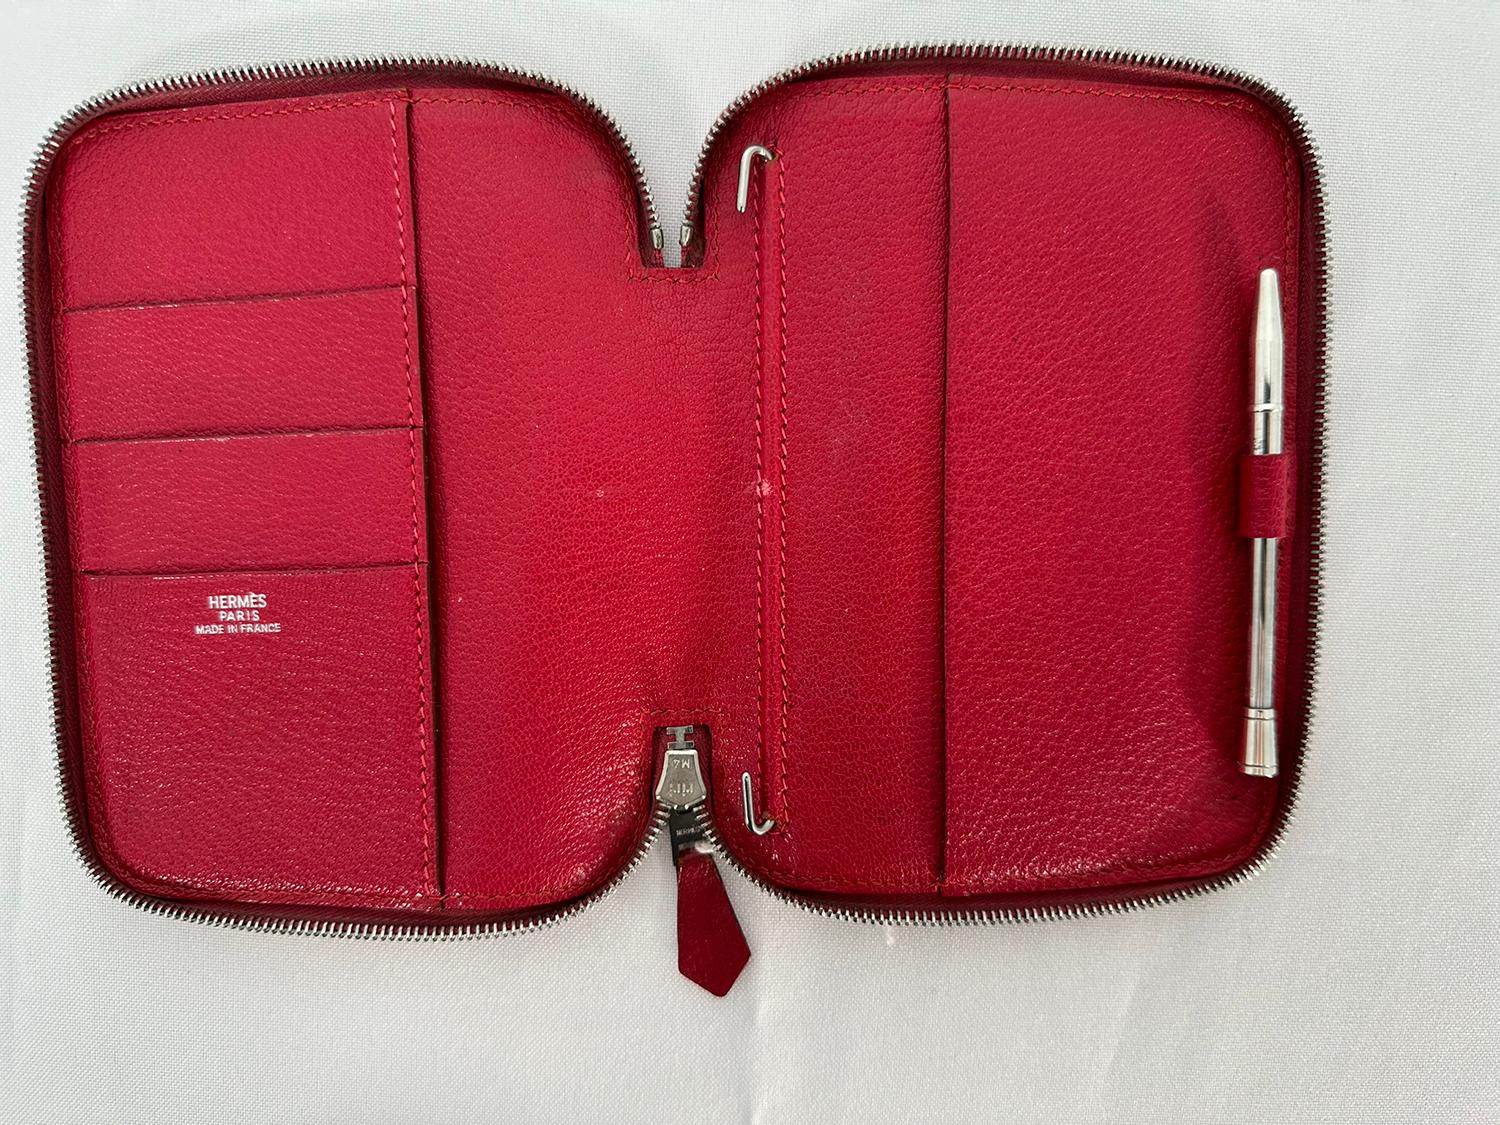 Hermes vintage zip around Globe Trotter PM Agenda Cover/Wallet with Sterling silver Pen from 2002. Clemence leather in a slightly pinkish red. The wallet/agenda opens with a silver zipper on 3 sides, beginning & ending 1